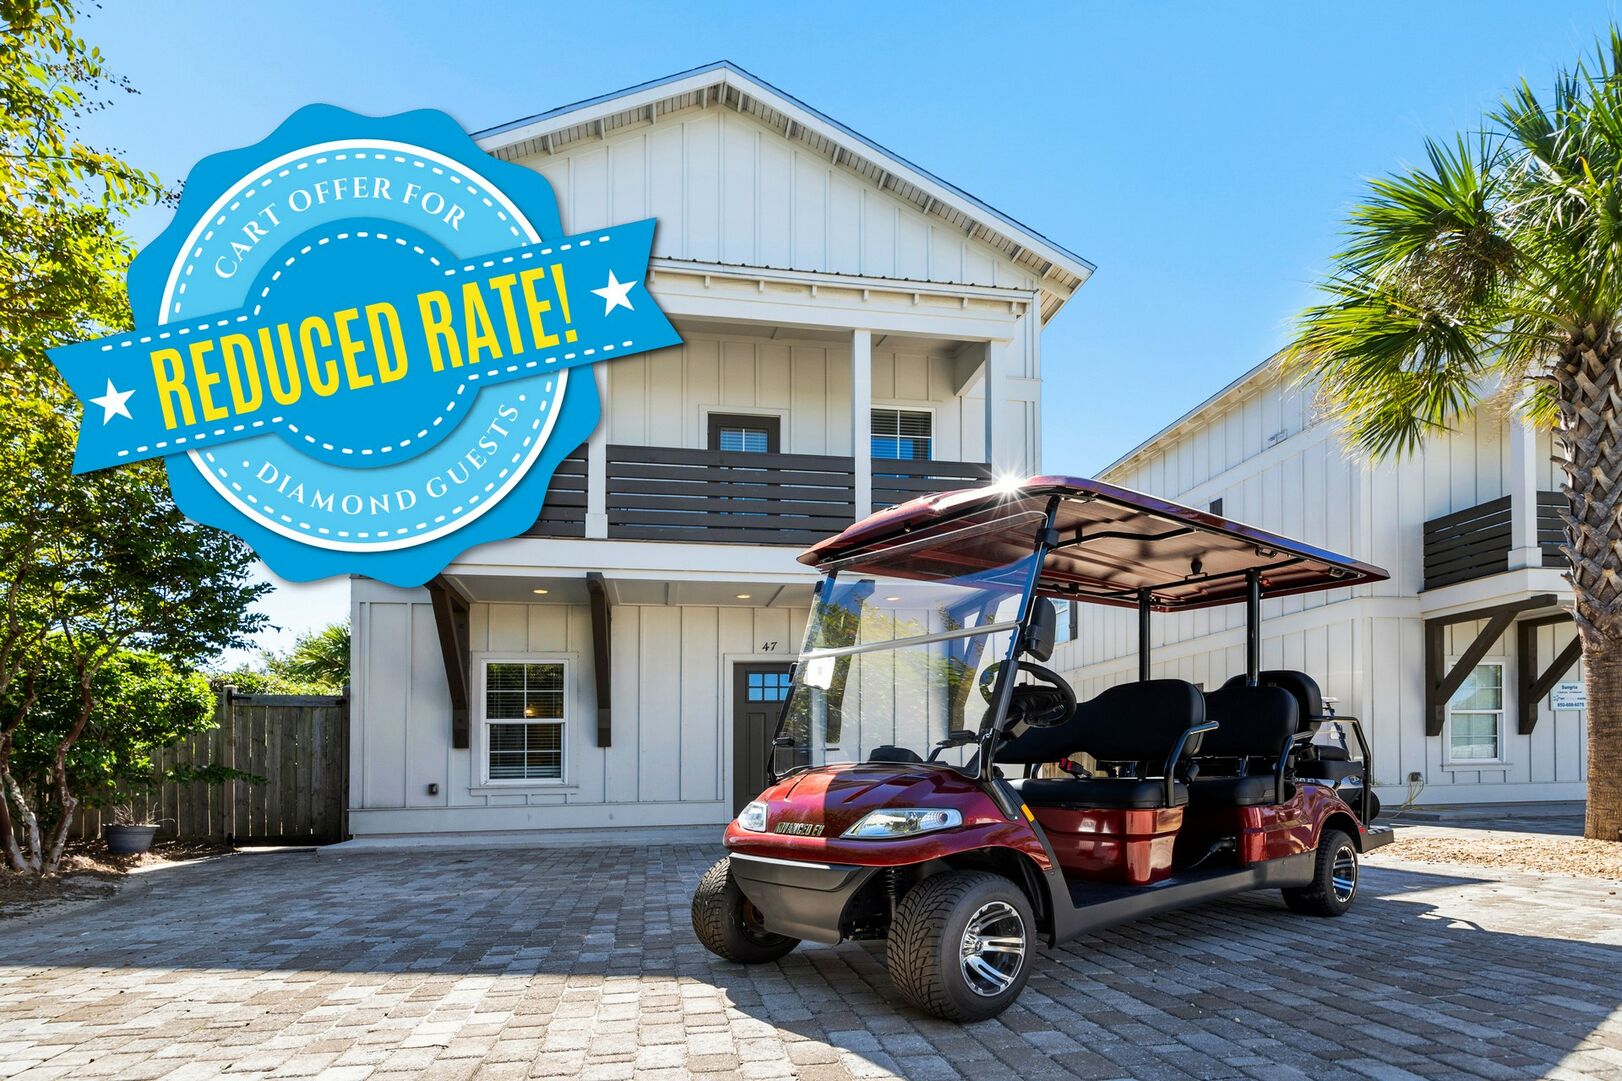 Street legal golf cart is not included, but is available at a REDUCED RATE!